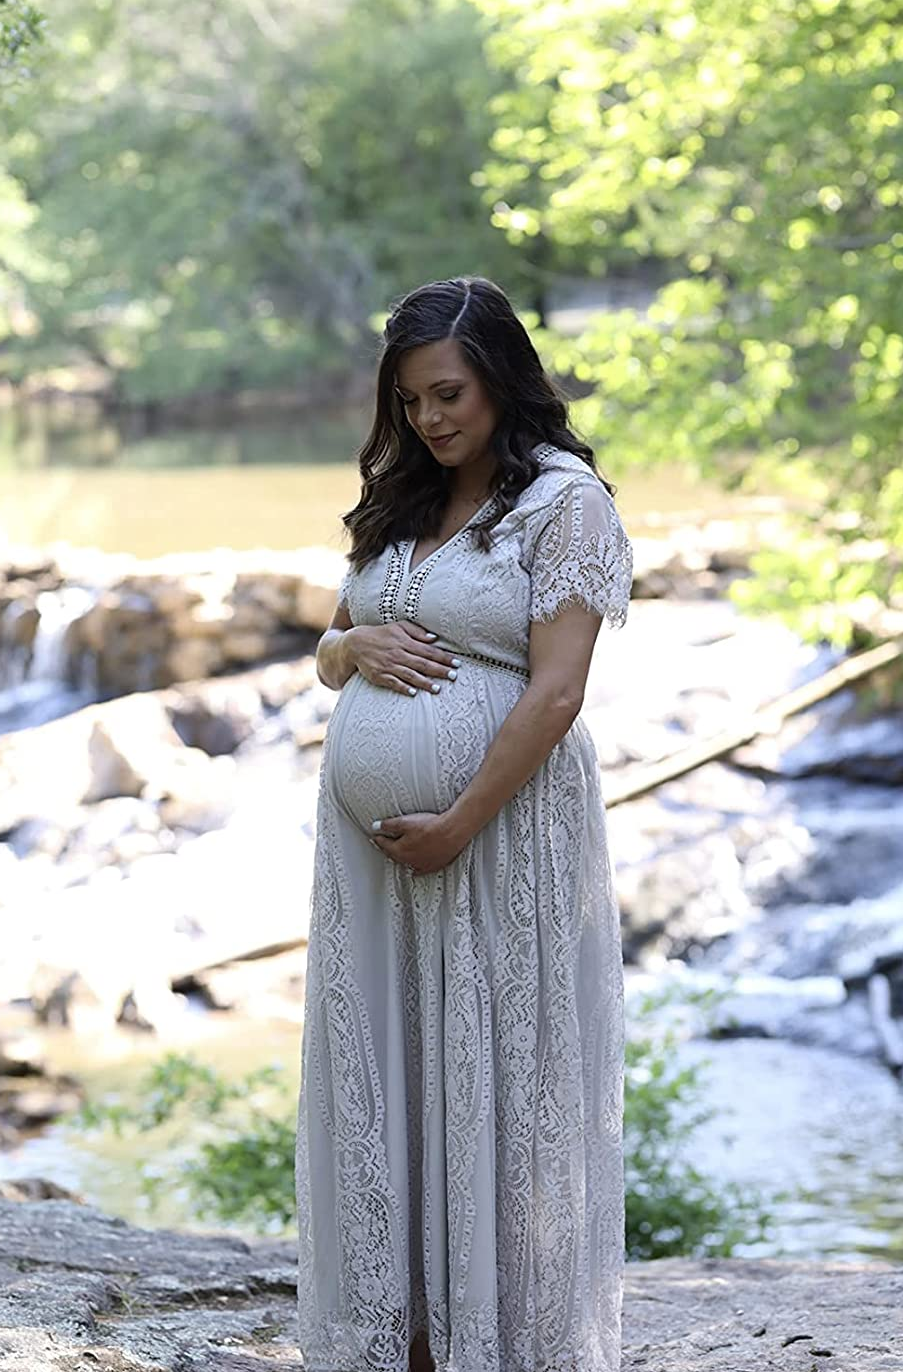 5 Best Shops to Buy Dresses for Maternity Photo Shoot